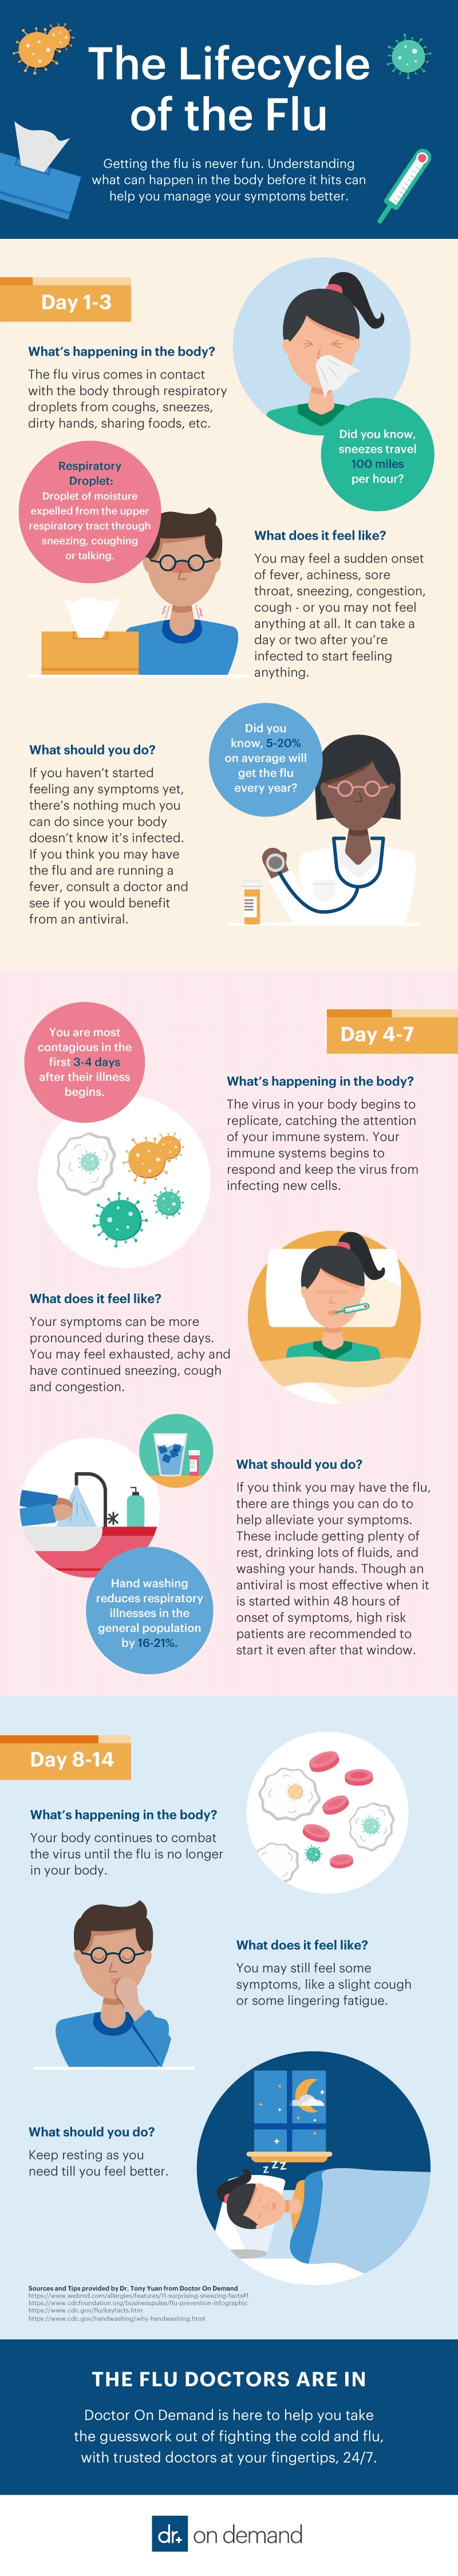 Lifecycle of the Flu